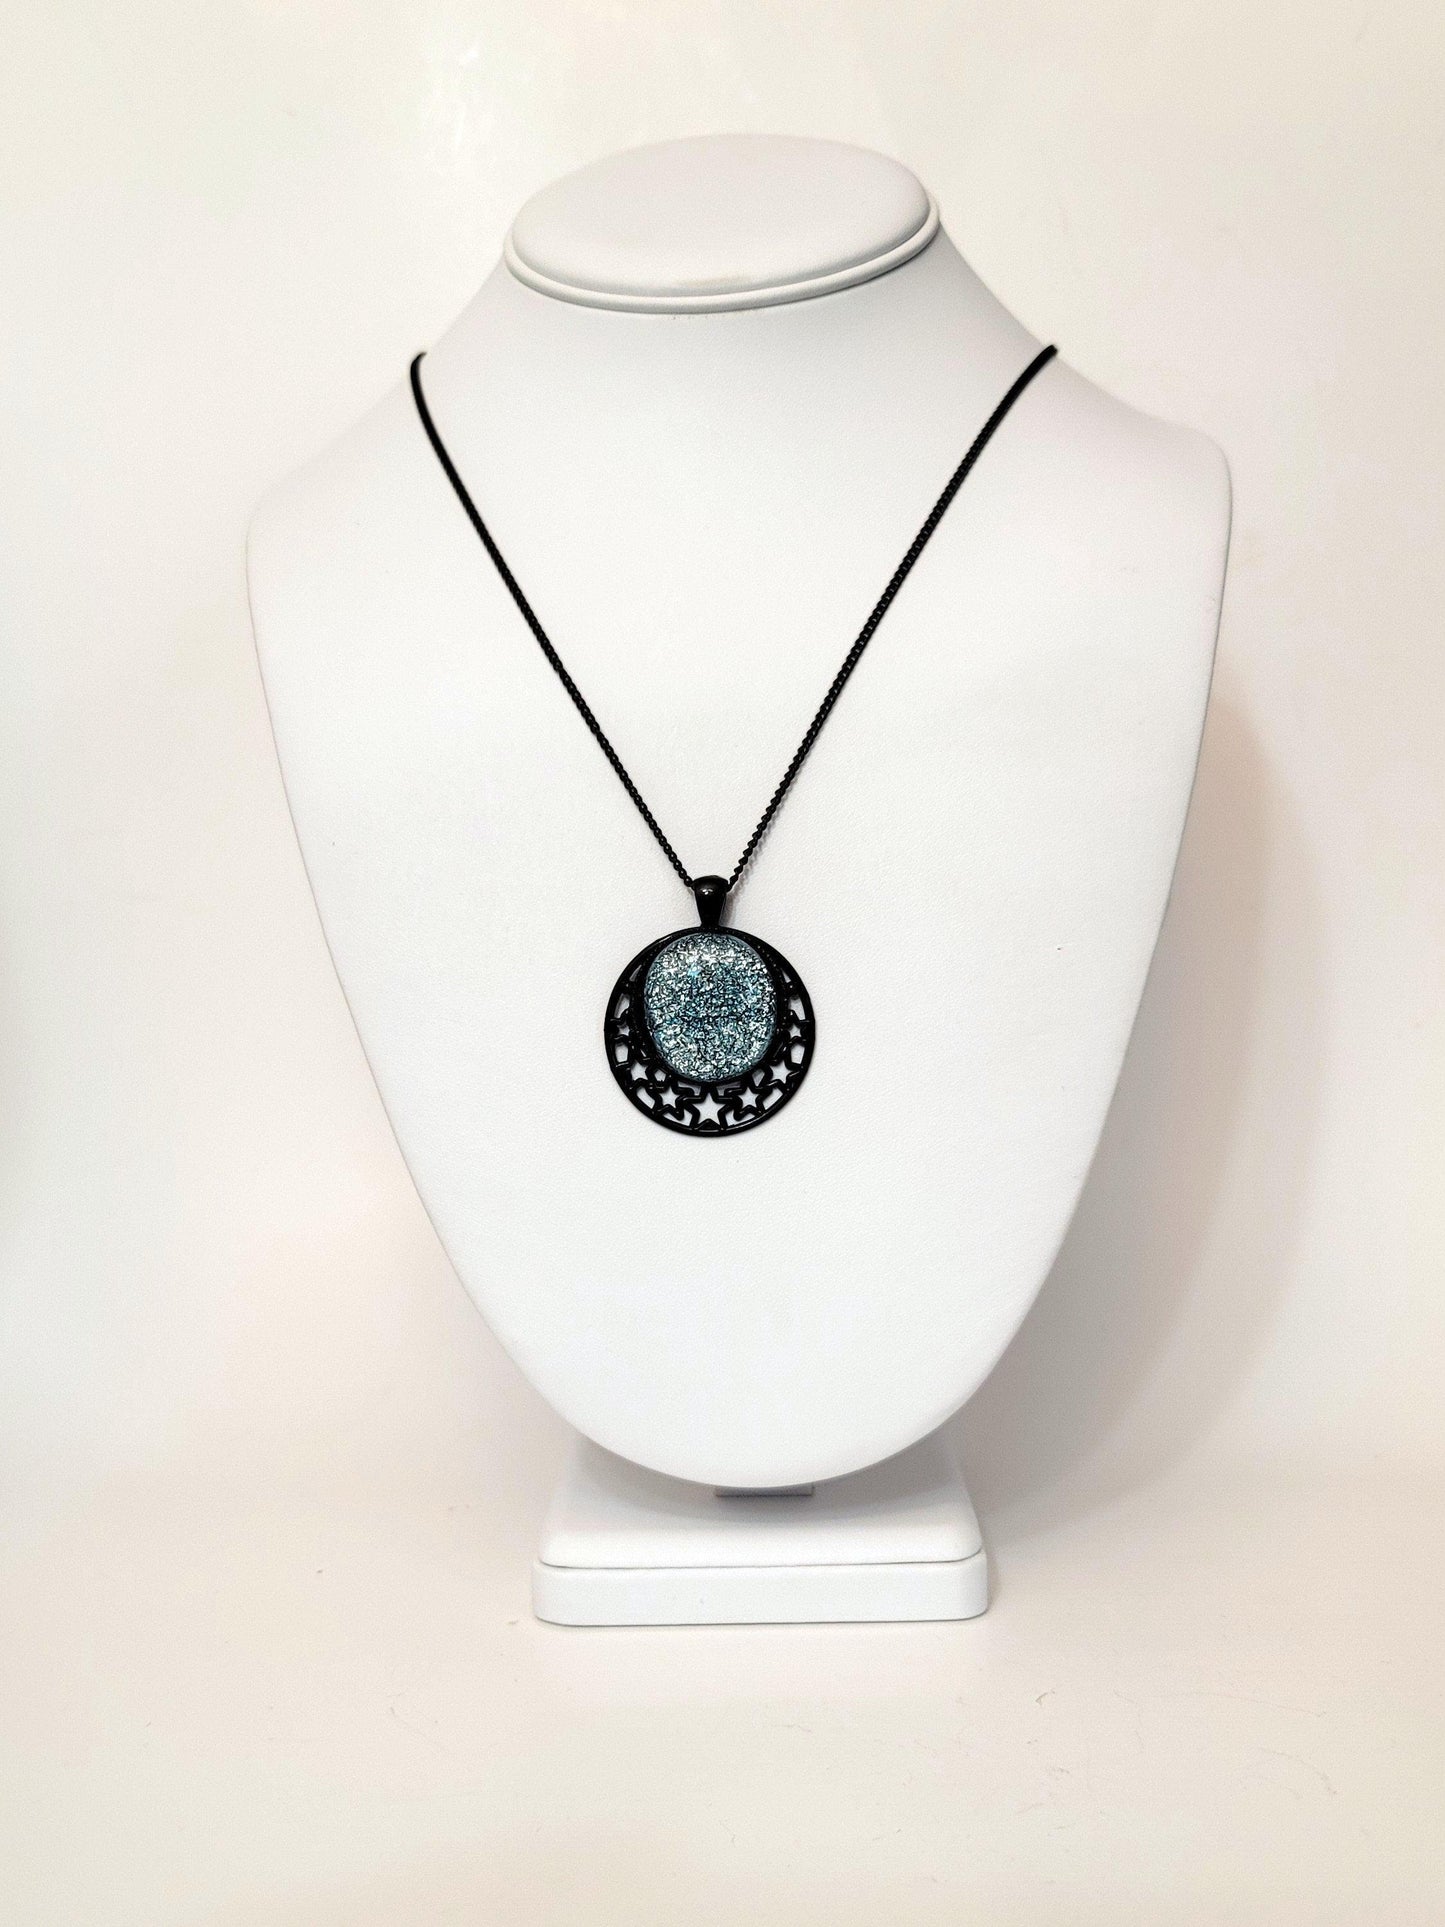 Black Stars Pendant with Silver dichroic glass cabochon on a 20 inch black metal chain. seeds glassworks fused glass jewelry seedsglassworks